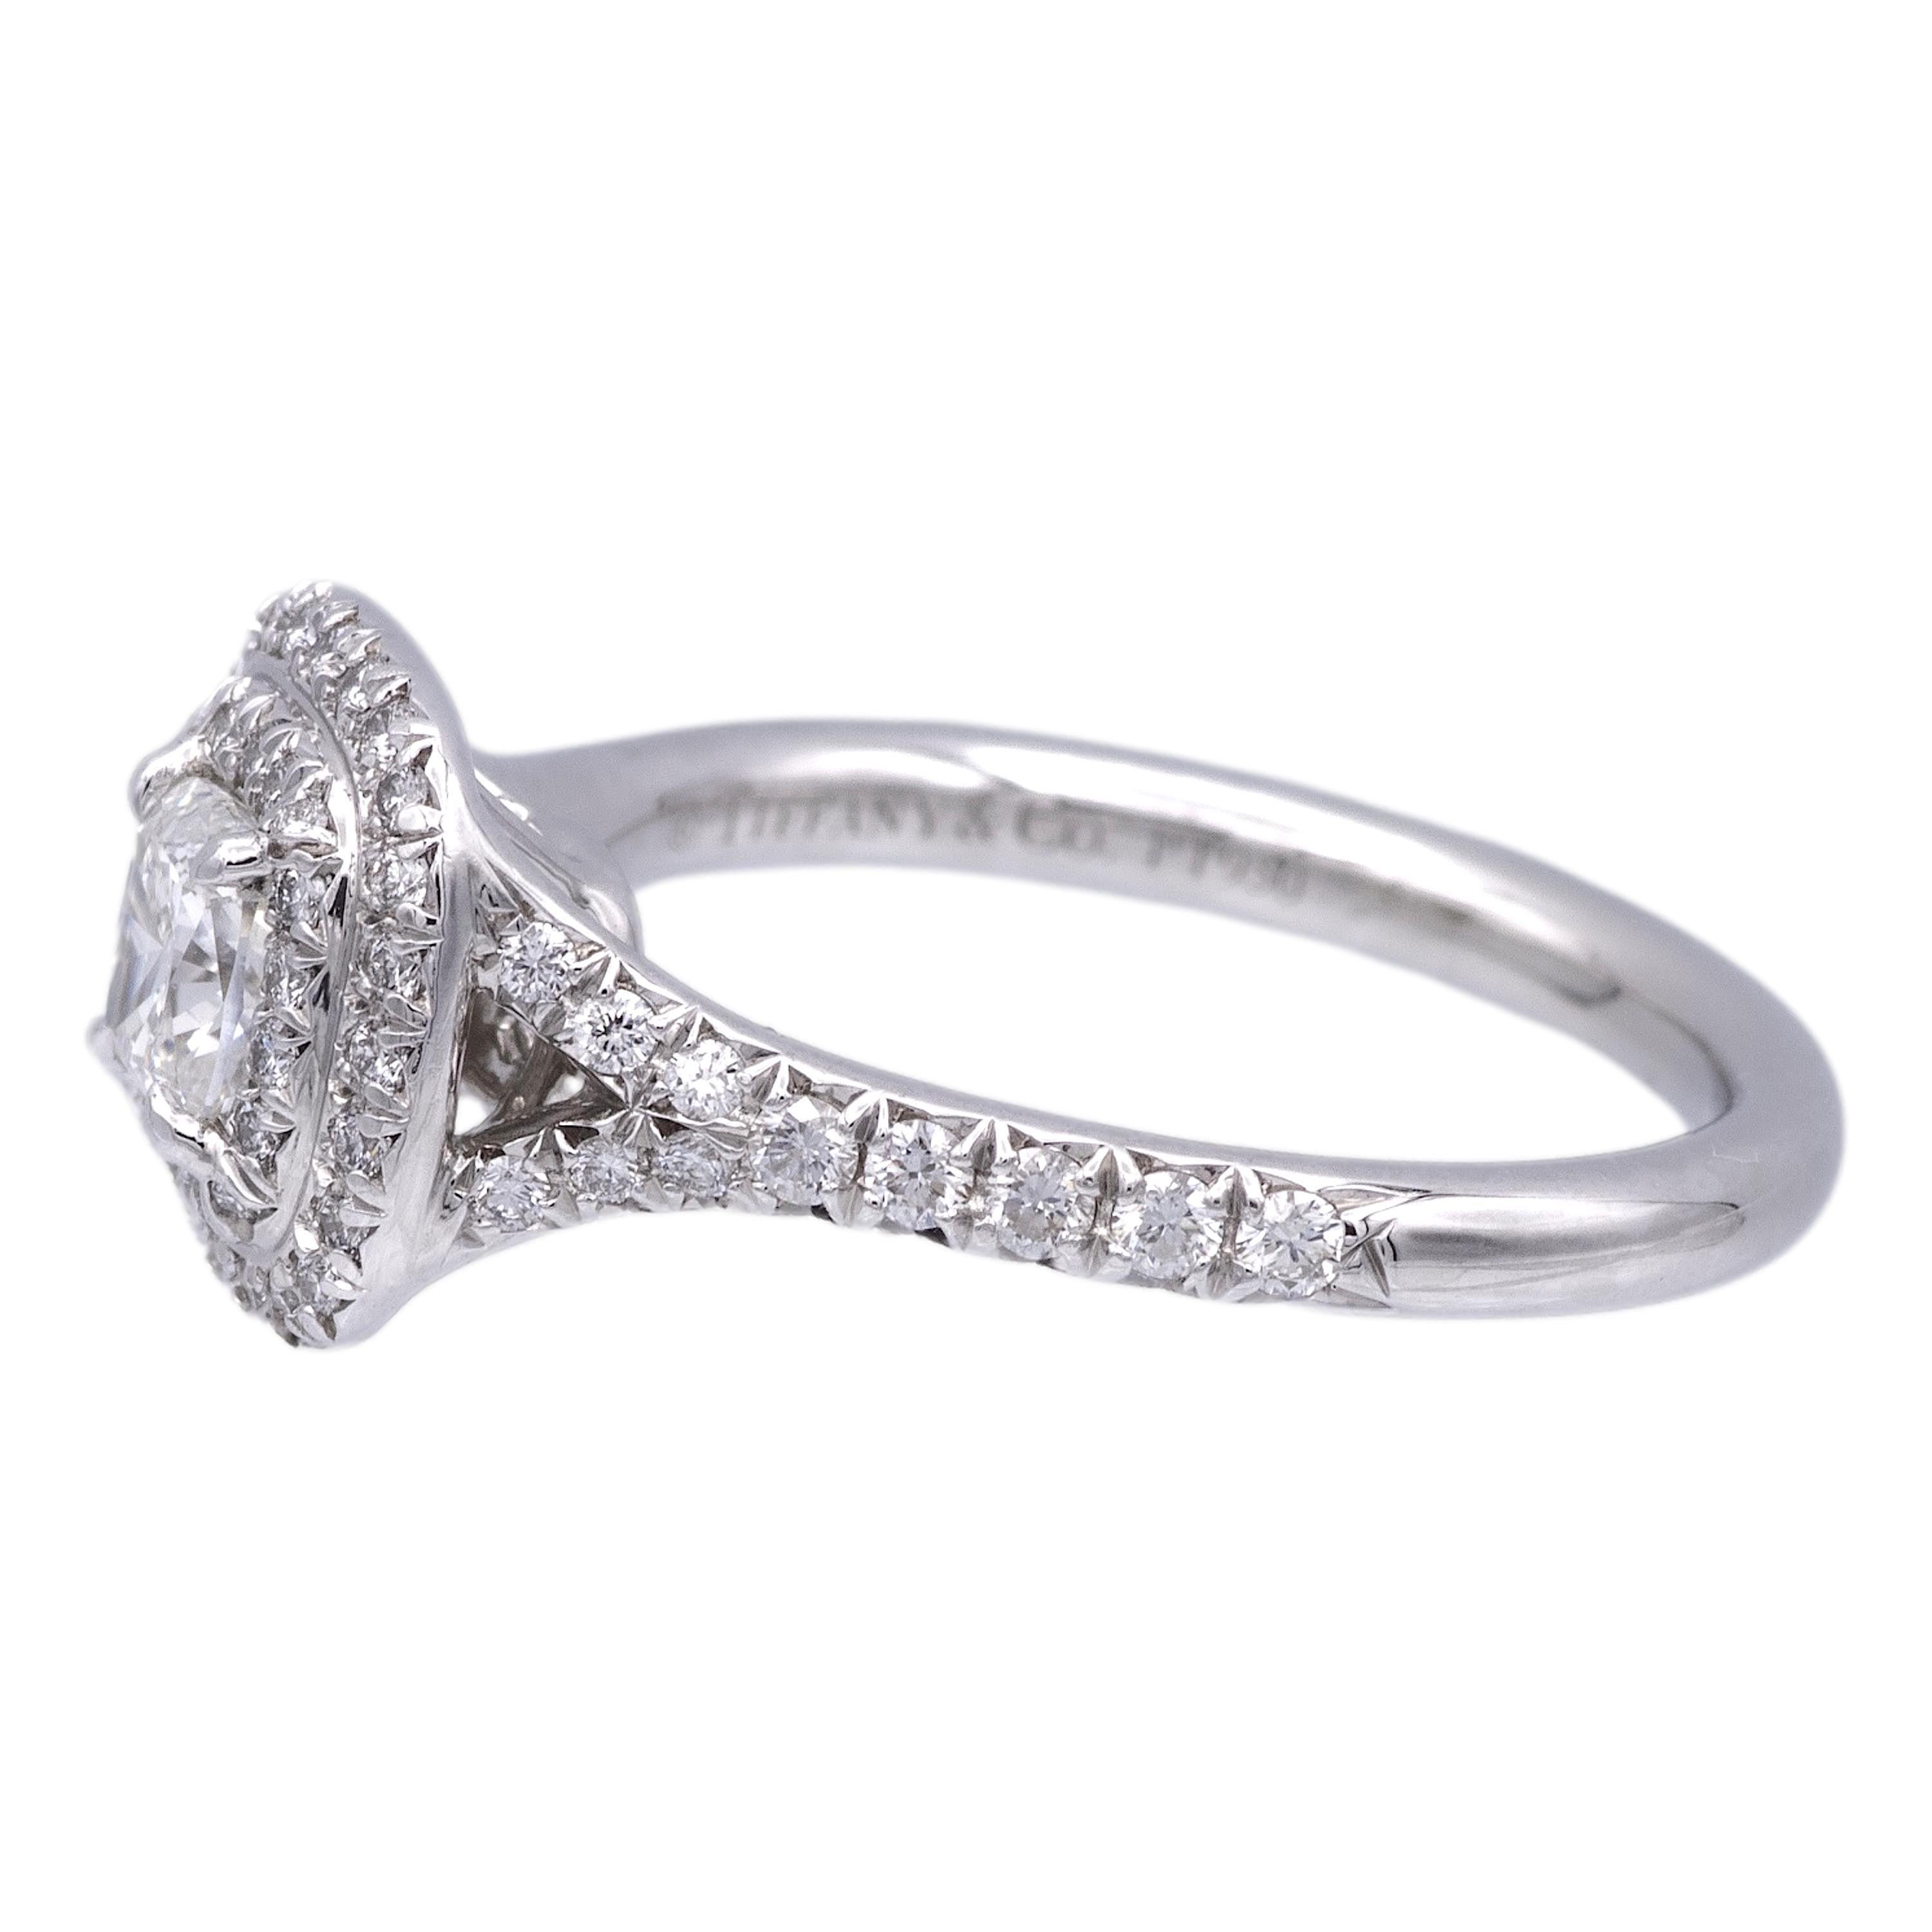 Tiffany & Co. engagement ring from the Soleste collection featuring a .47 ct cushion center , F Color, VS1 clarity finely crafted in platinum, accented by a double row halo and split shank design with round brilliant cut bead set diamonds weighing